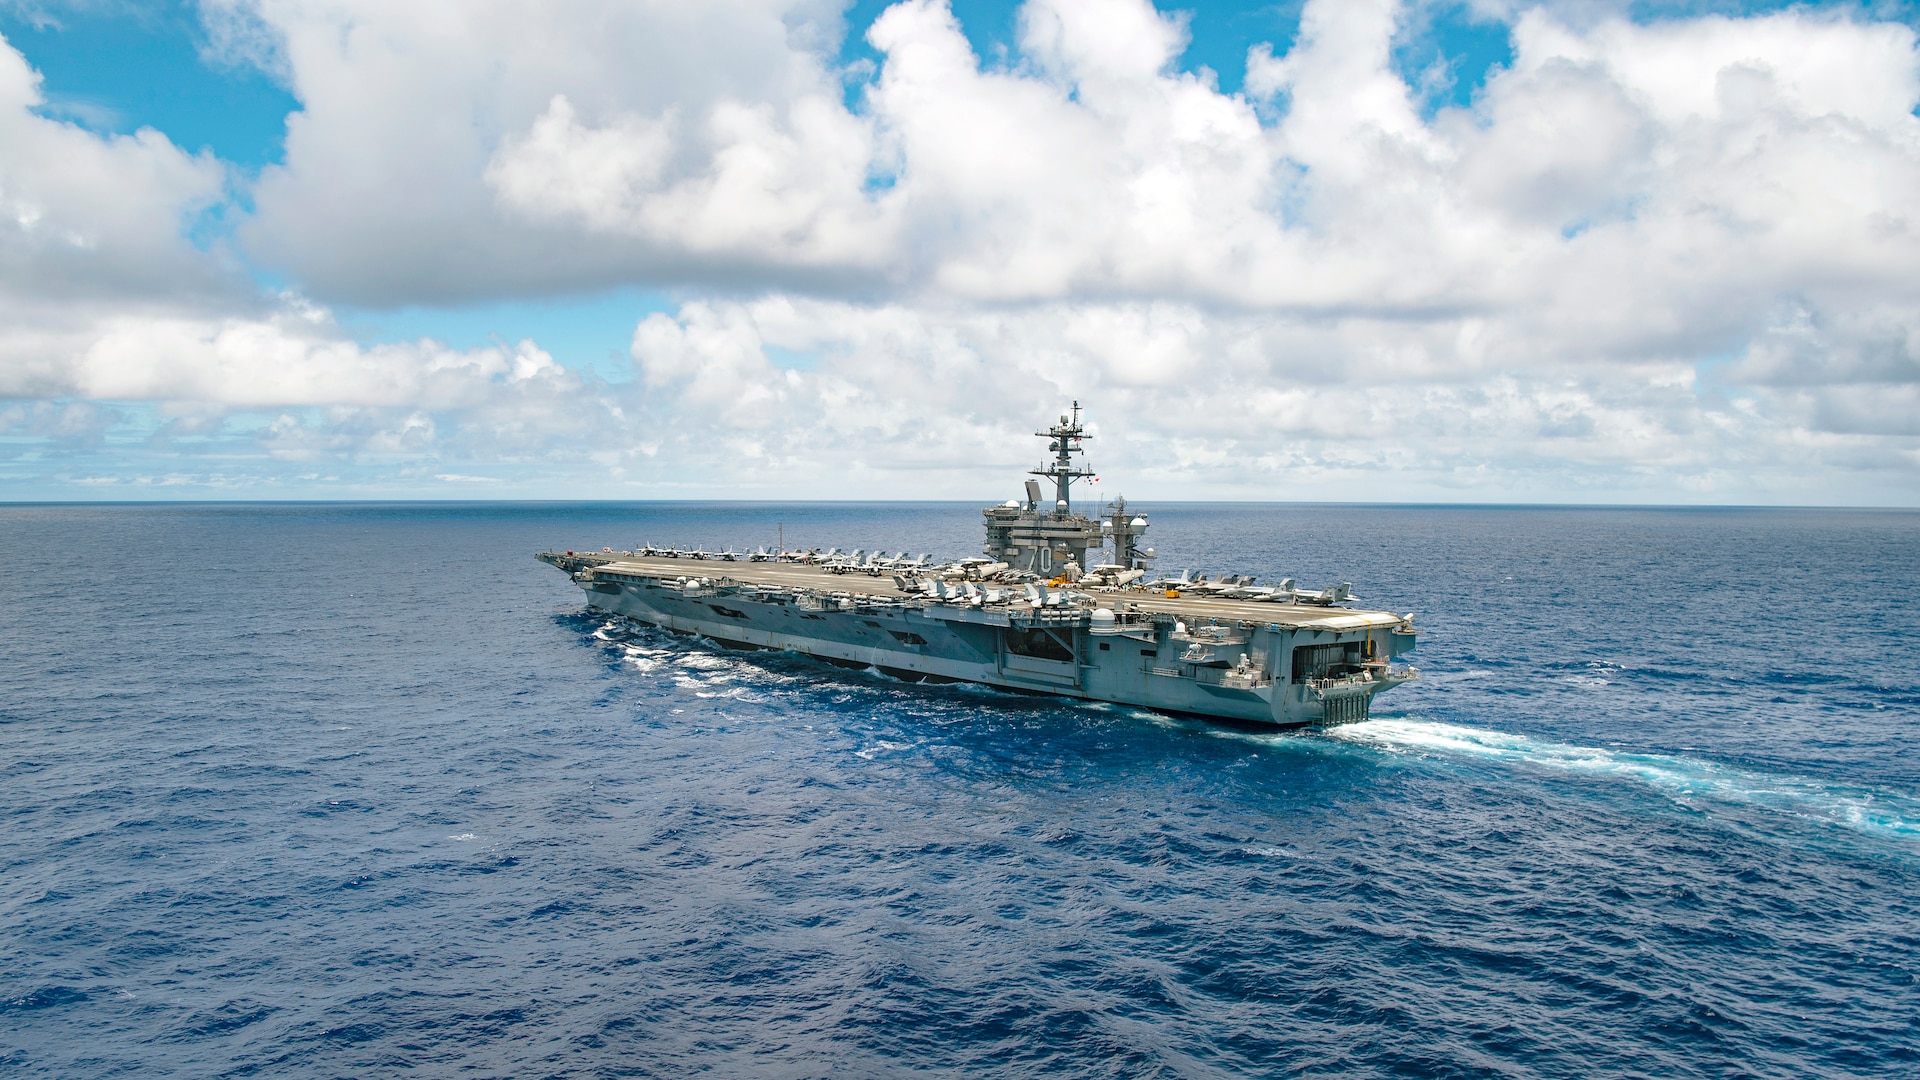 Nimitz-class aircraft carrier USS Carl Vinson (CVN 70) transits the Pacific Ocean, June 22, 2021. Vinson is currently underway conducting routine maritime operations in U.S. 3rd Fleet. (U.S. Navy photo by Mass Communication Specialist 3rd Class Haydn N. Smith)